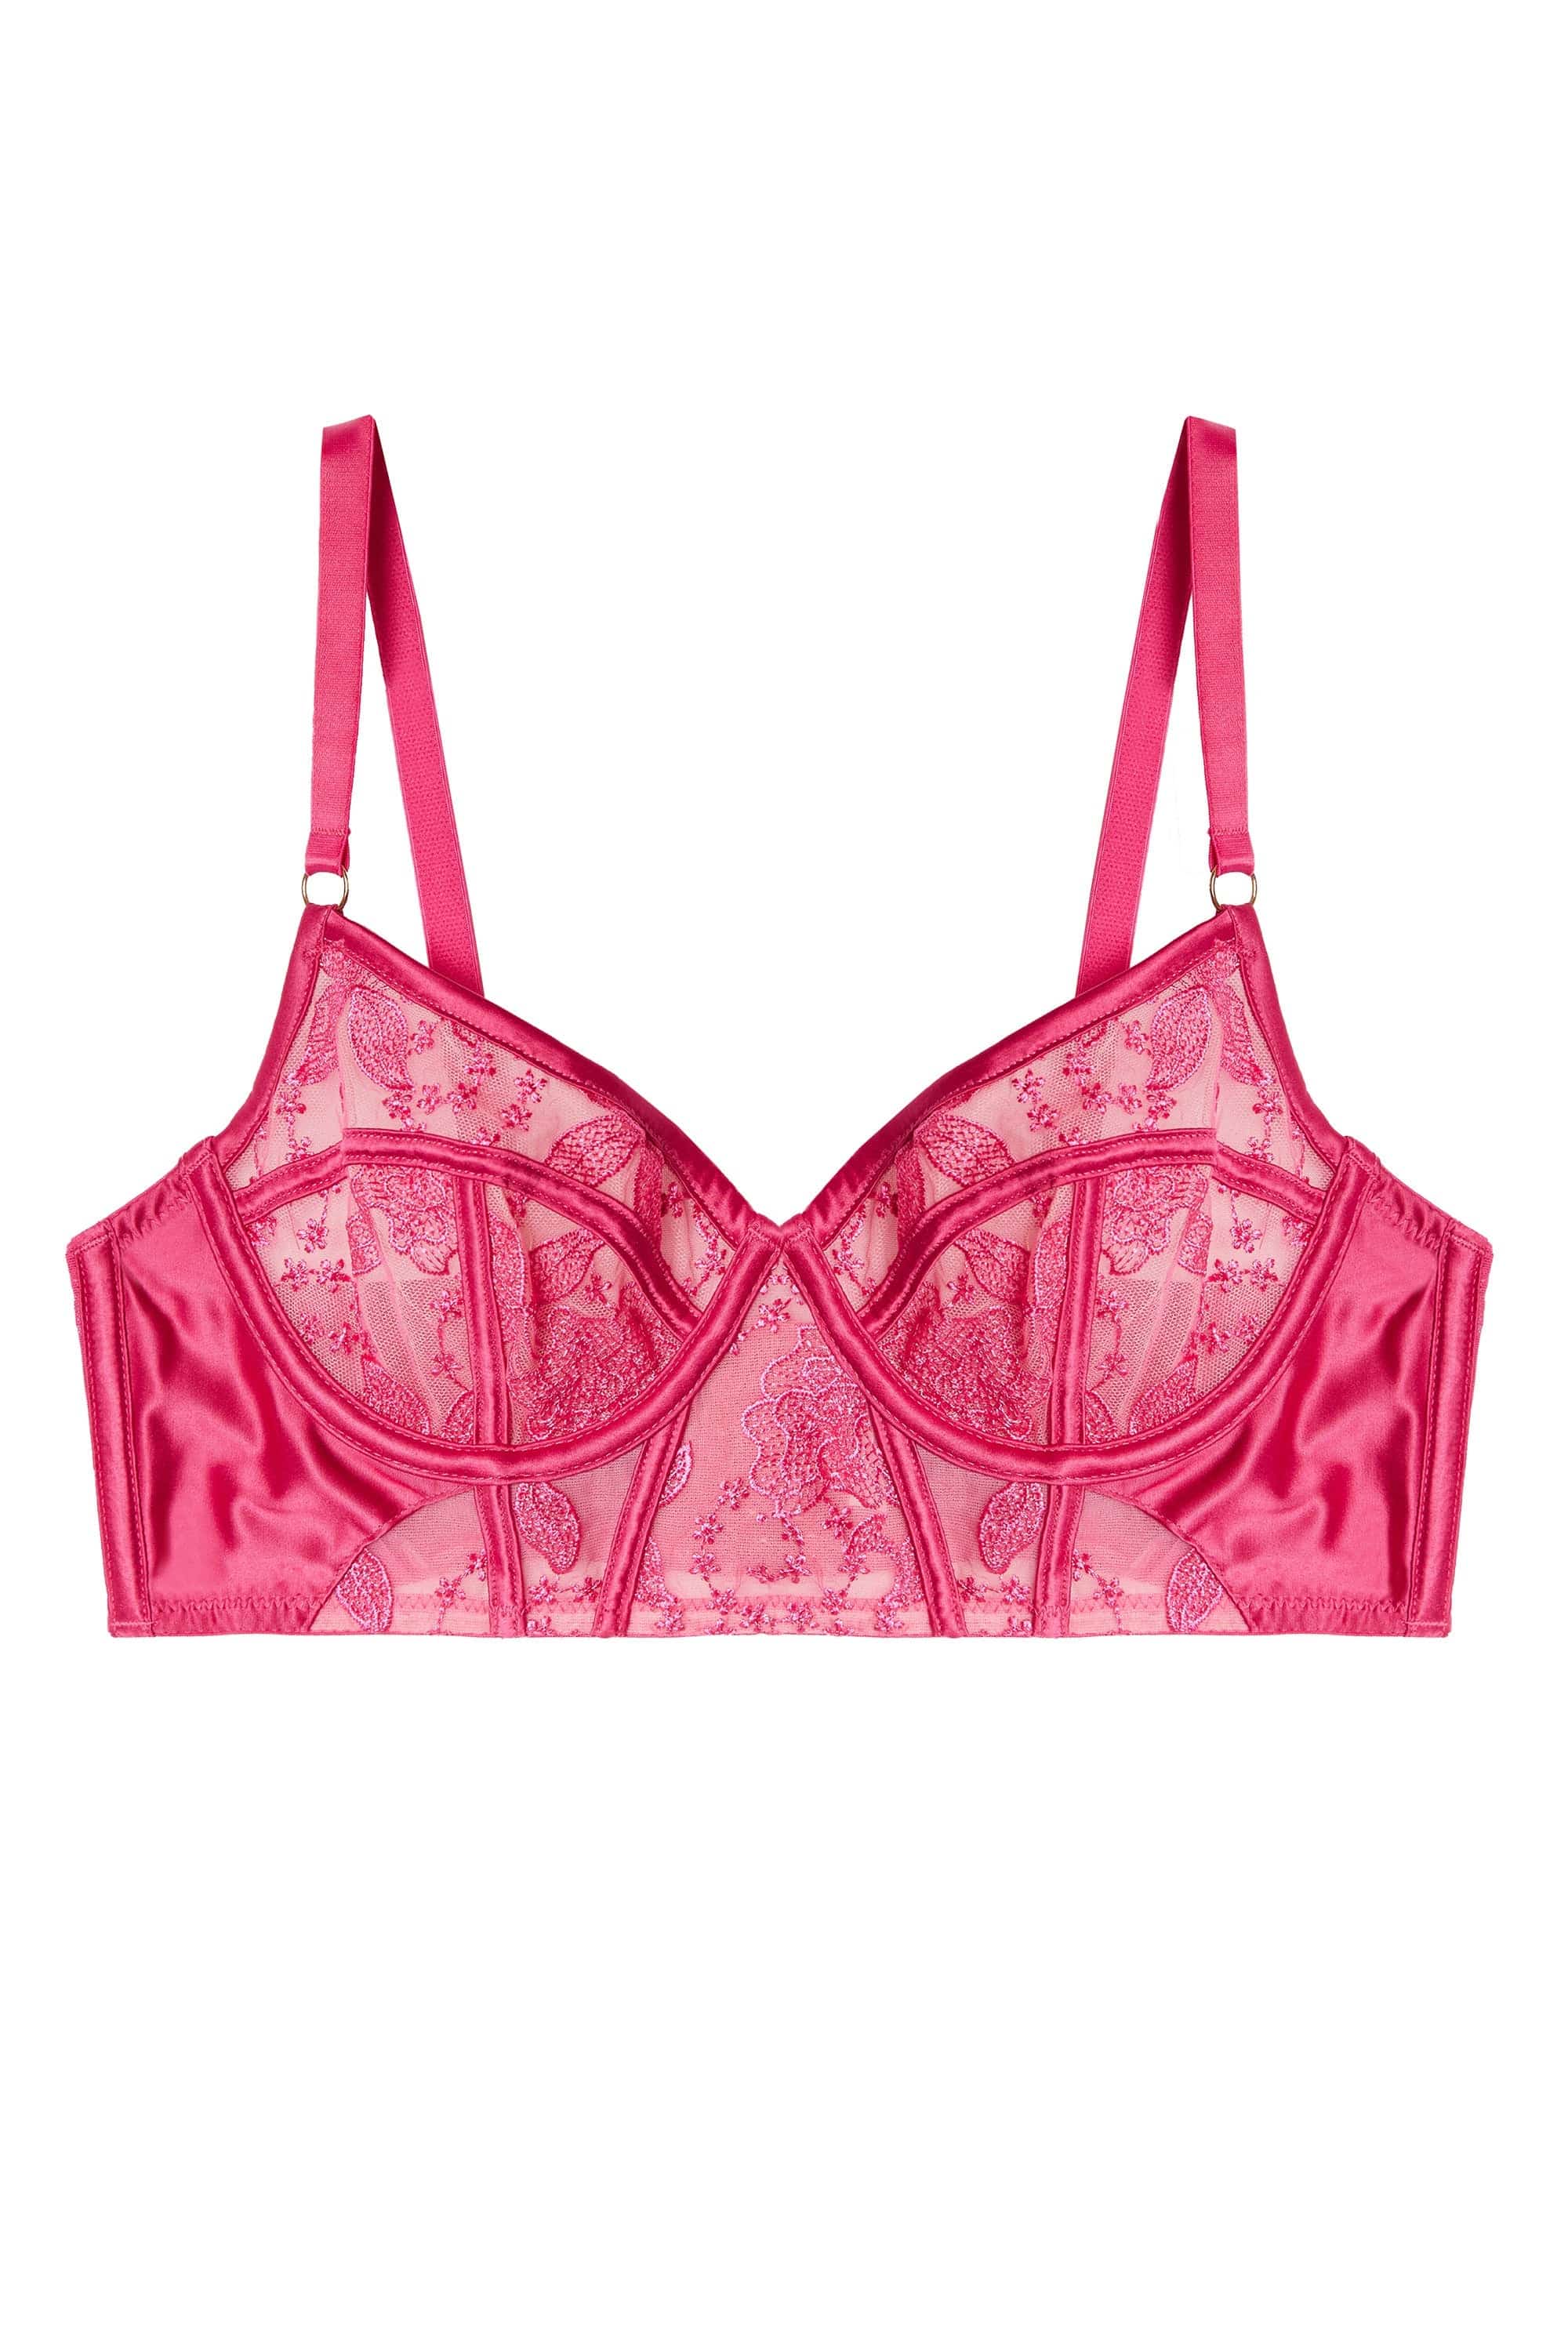 Buy Pink Bras for Women by LYRA Online